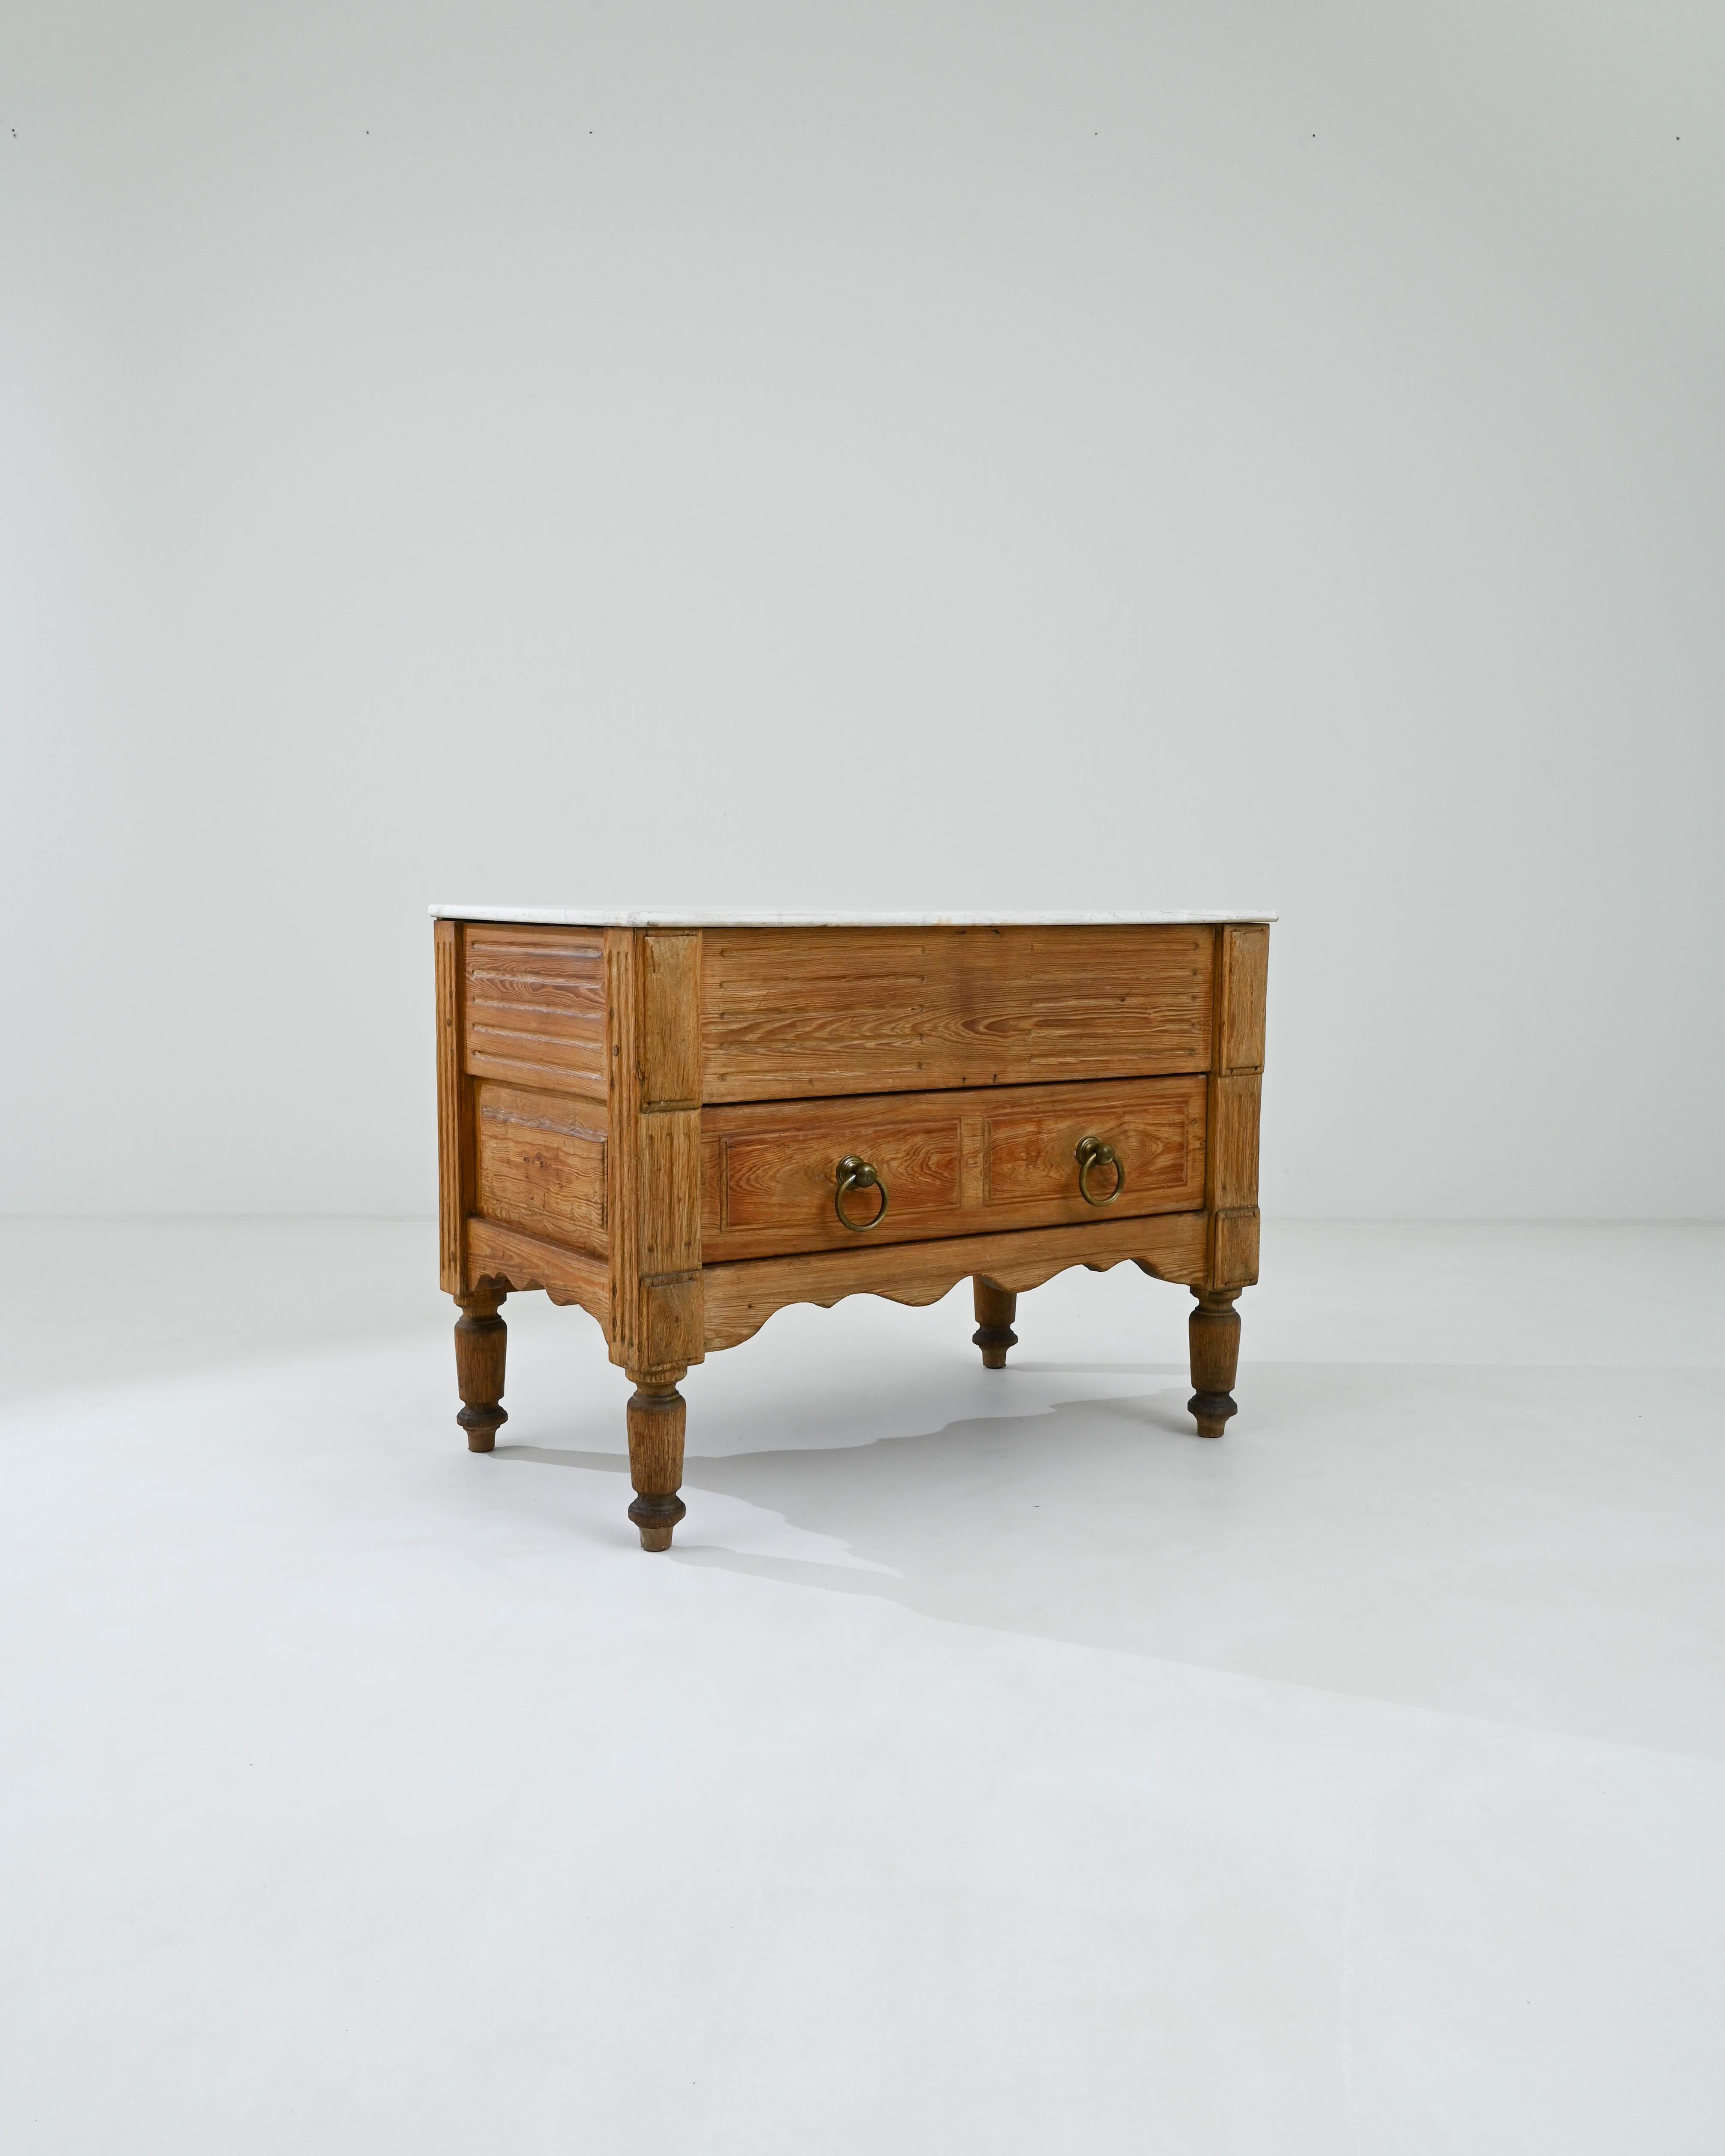 Early 20th Century Turn of the Century French Wooden Work Table with Marble Top